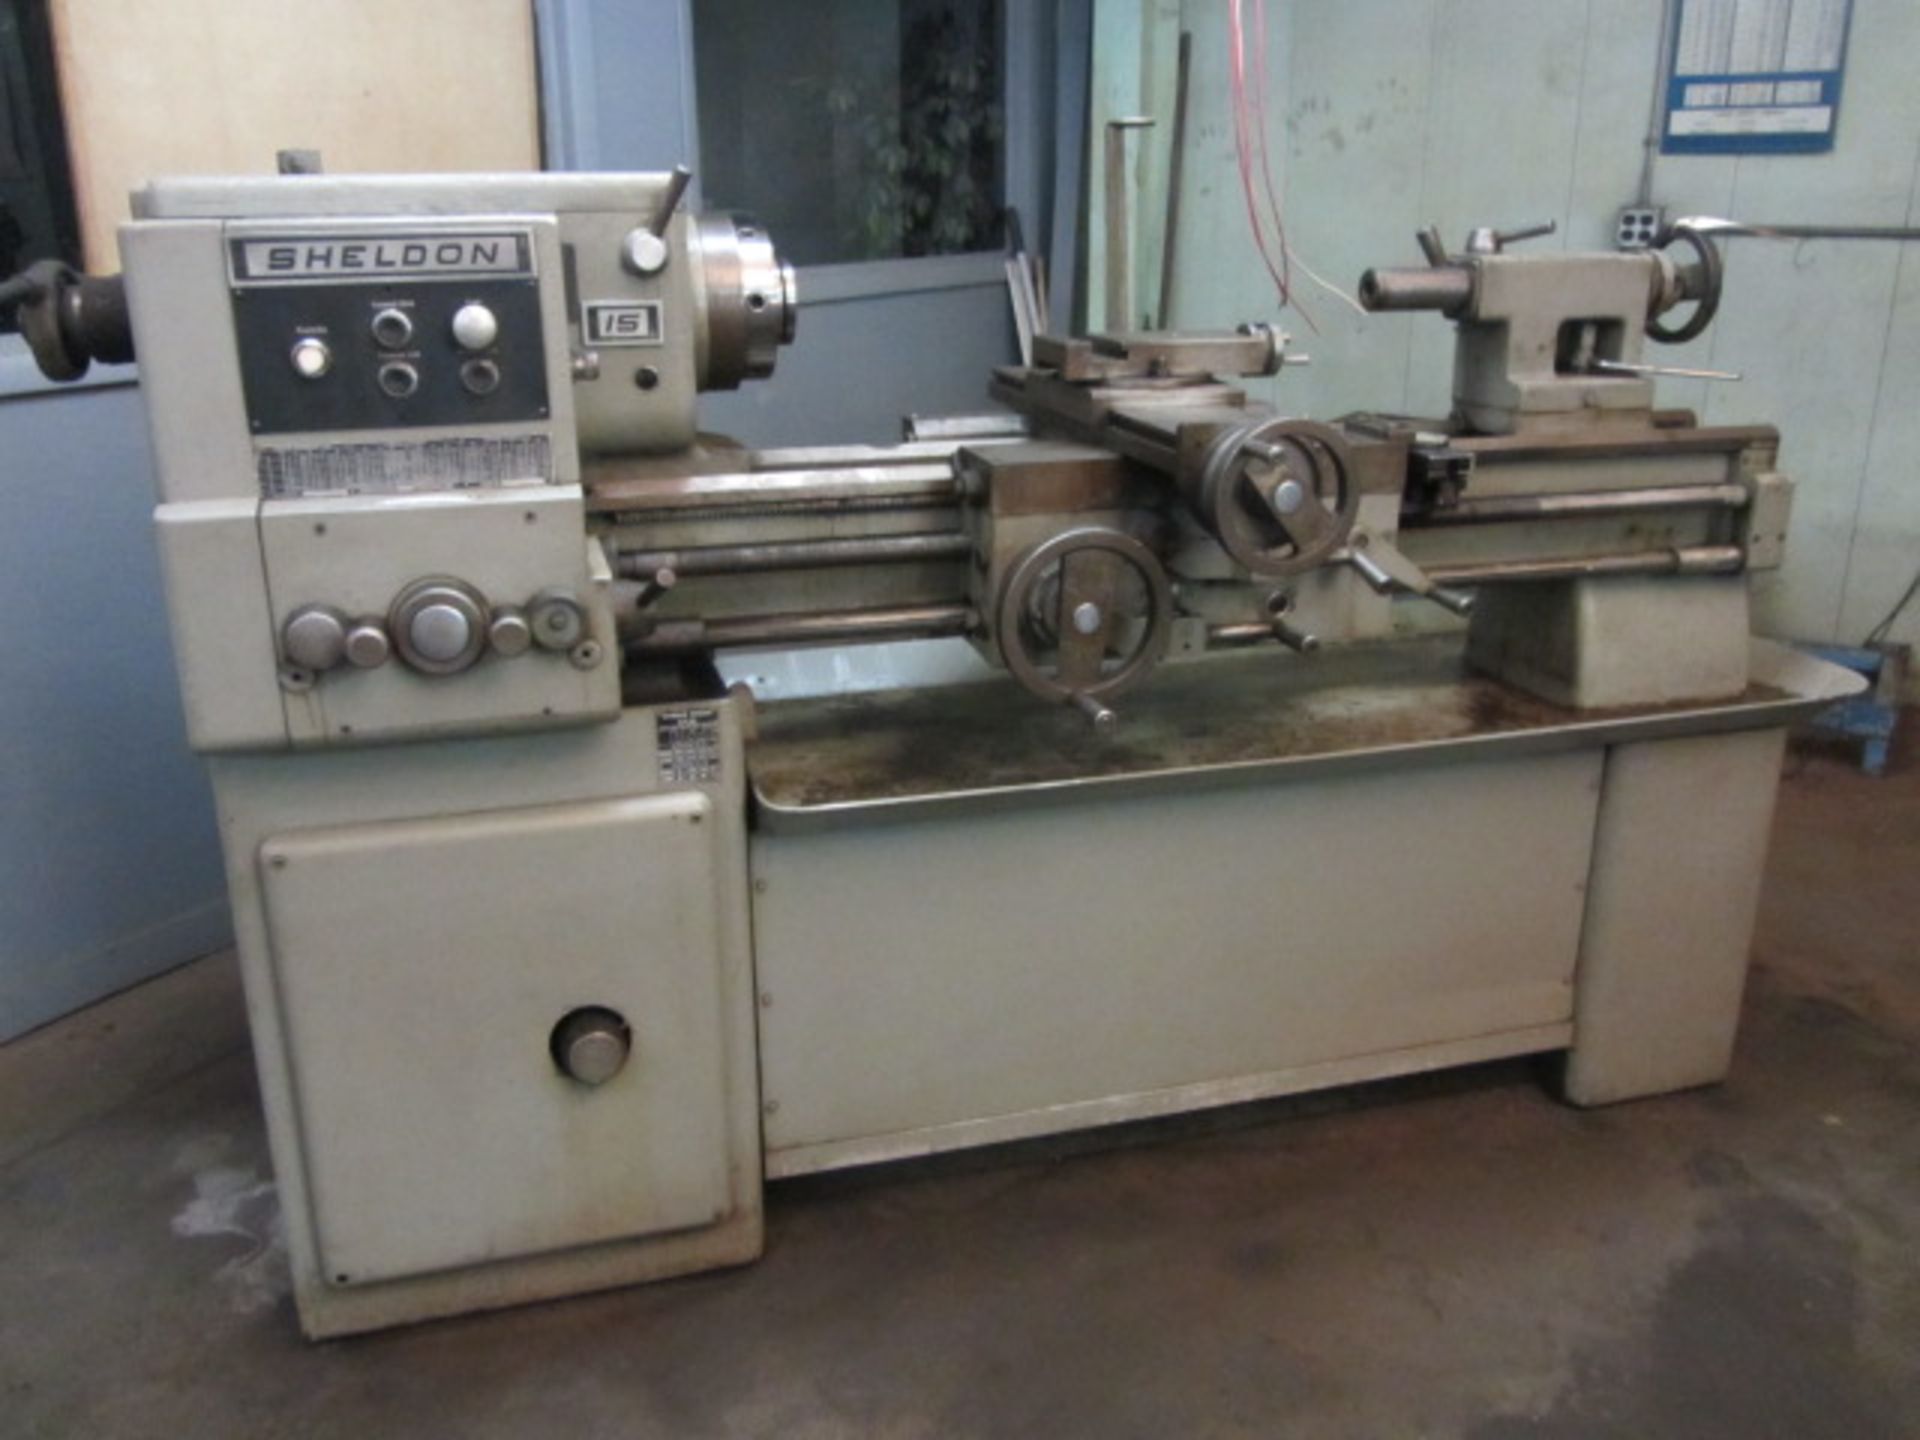 Sheldon Model 15 16'' x 46'' CC Engine Lathe with Spindle Speeds to 1250 RPM, Chip Pan, 5C Collet - Image 2 of 6